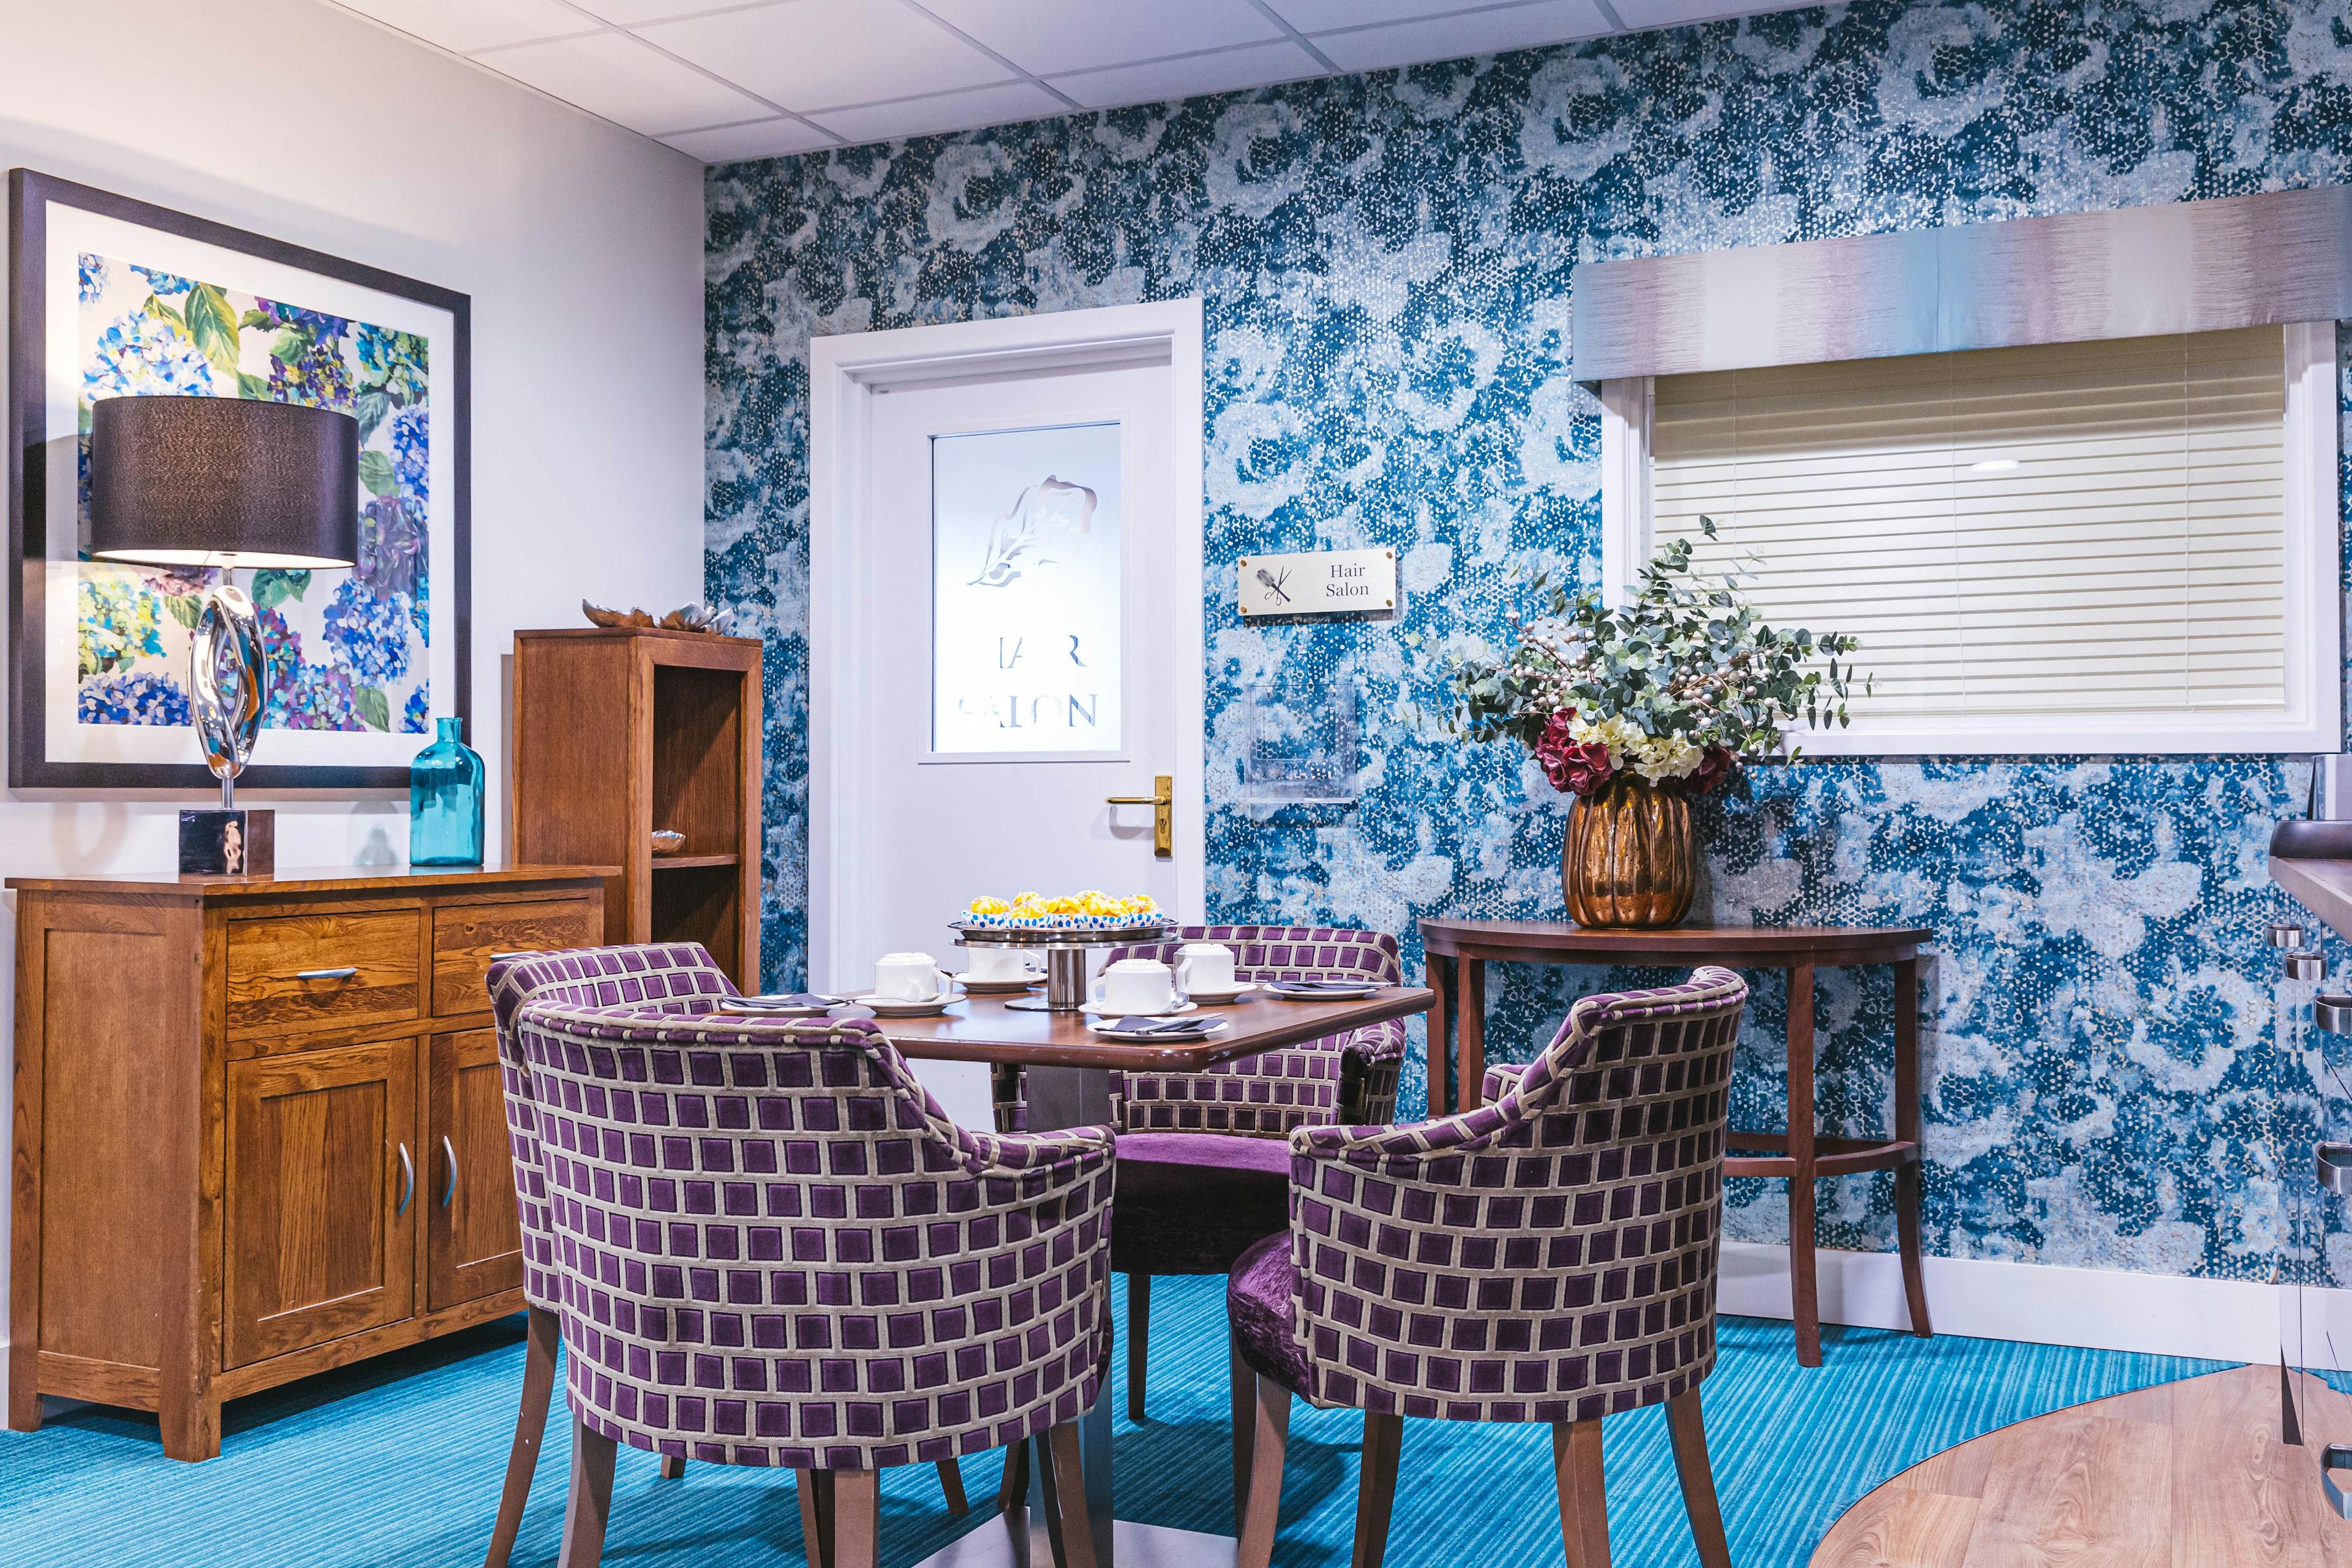 Cafe at Rose Lodge Care Home in Wisbech, Cambridgeshire